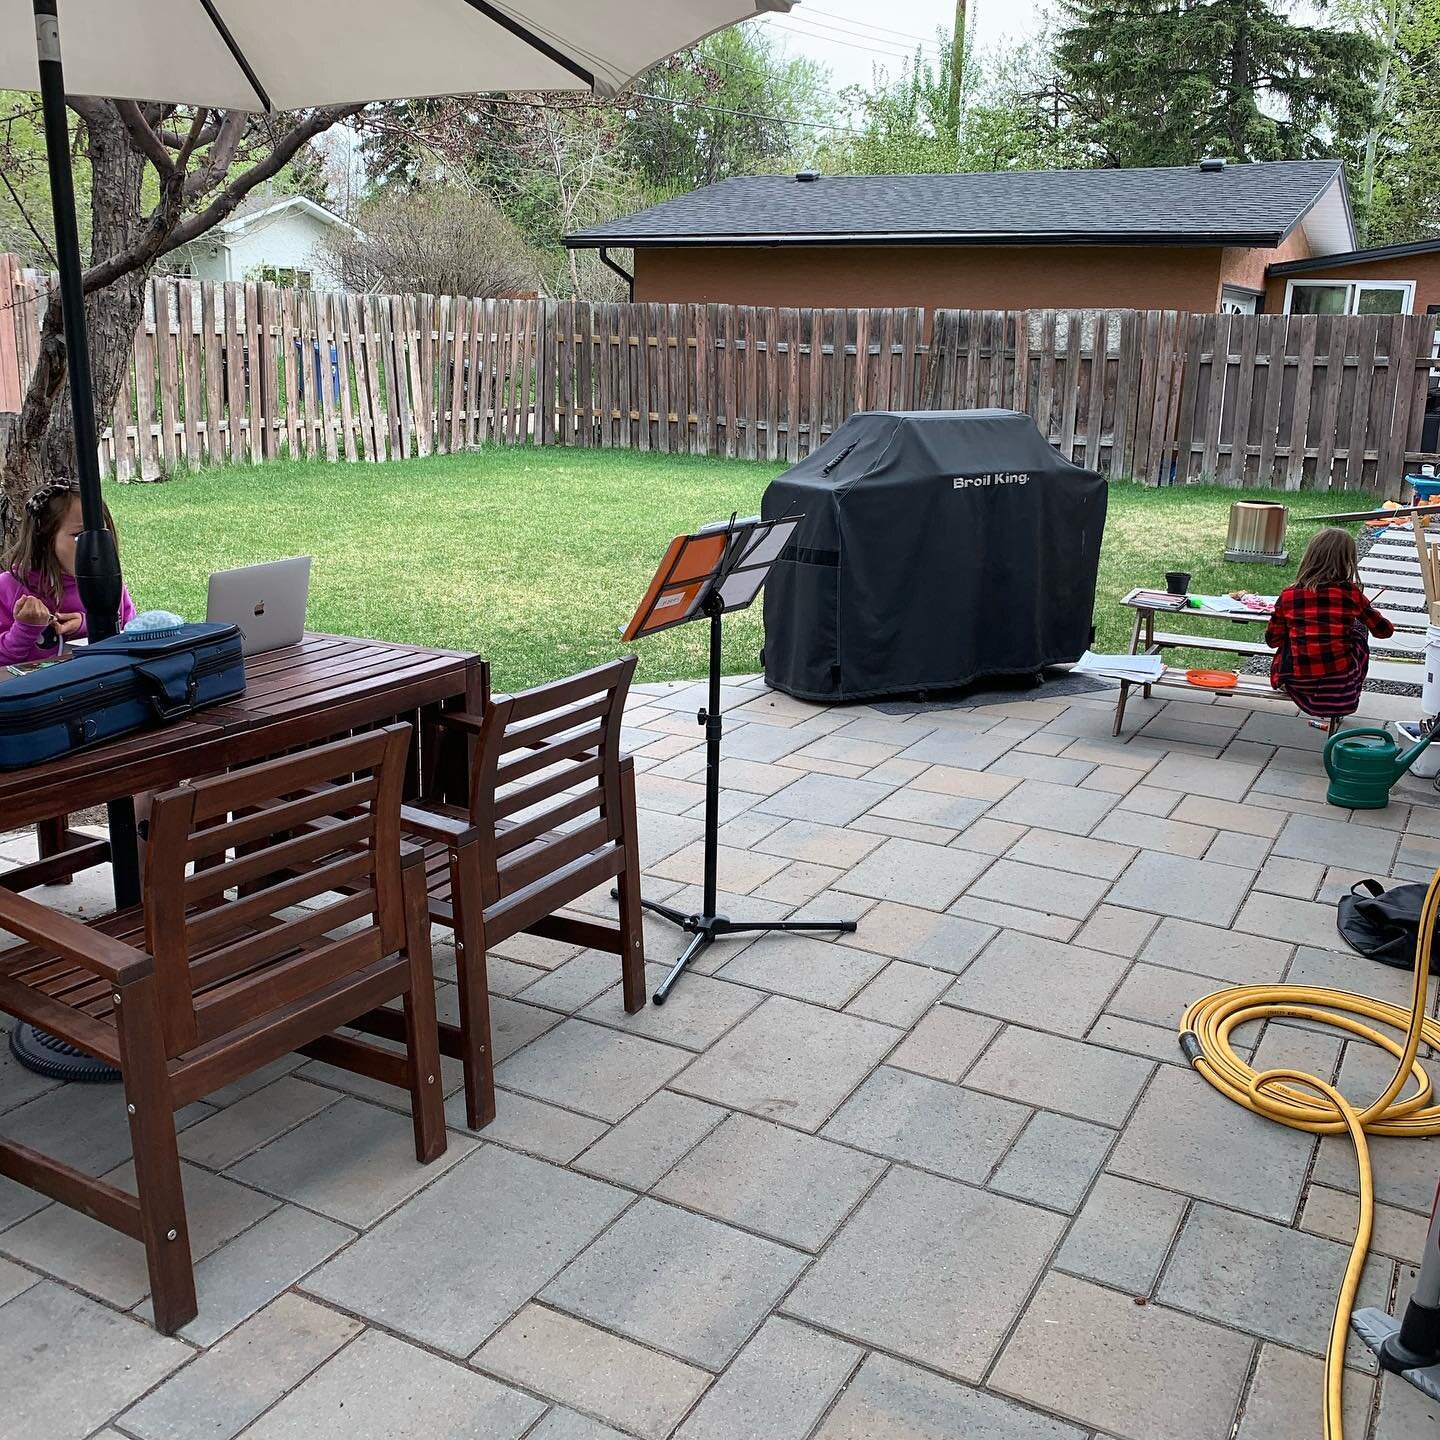 Let&rsquo;s extend the weekend! #homeschooling outside 🌷 for the win this morning. After a month of working in the basement this is a wonderful change. We are even doing violin 🎻 practice outside! 

Going into this week how are you adjusting to kee